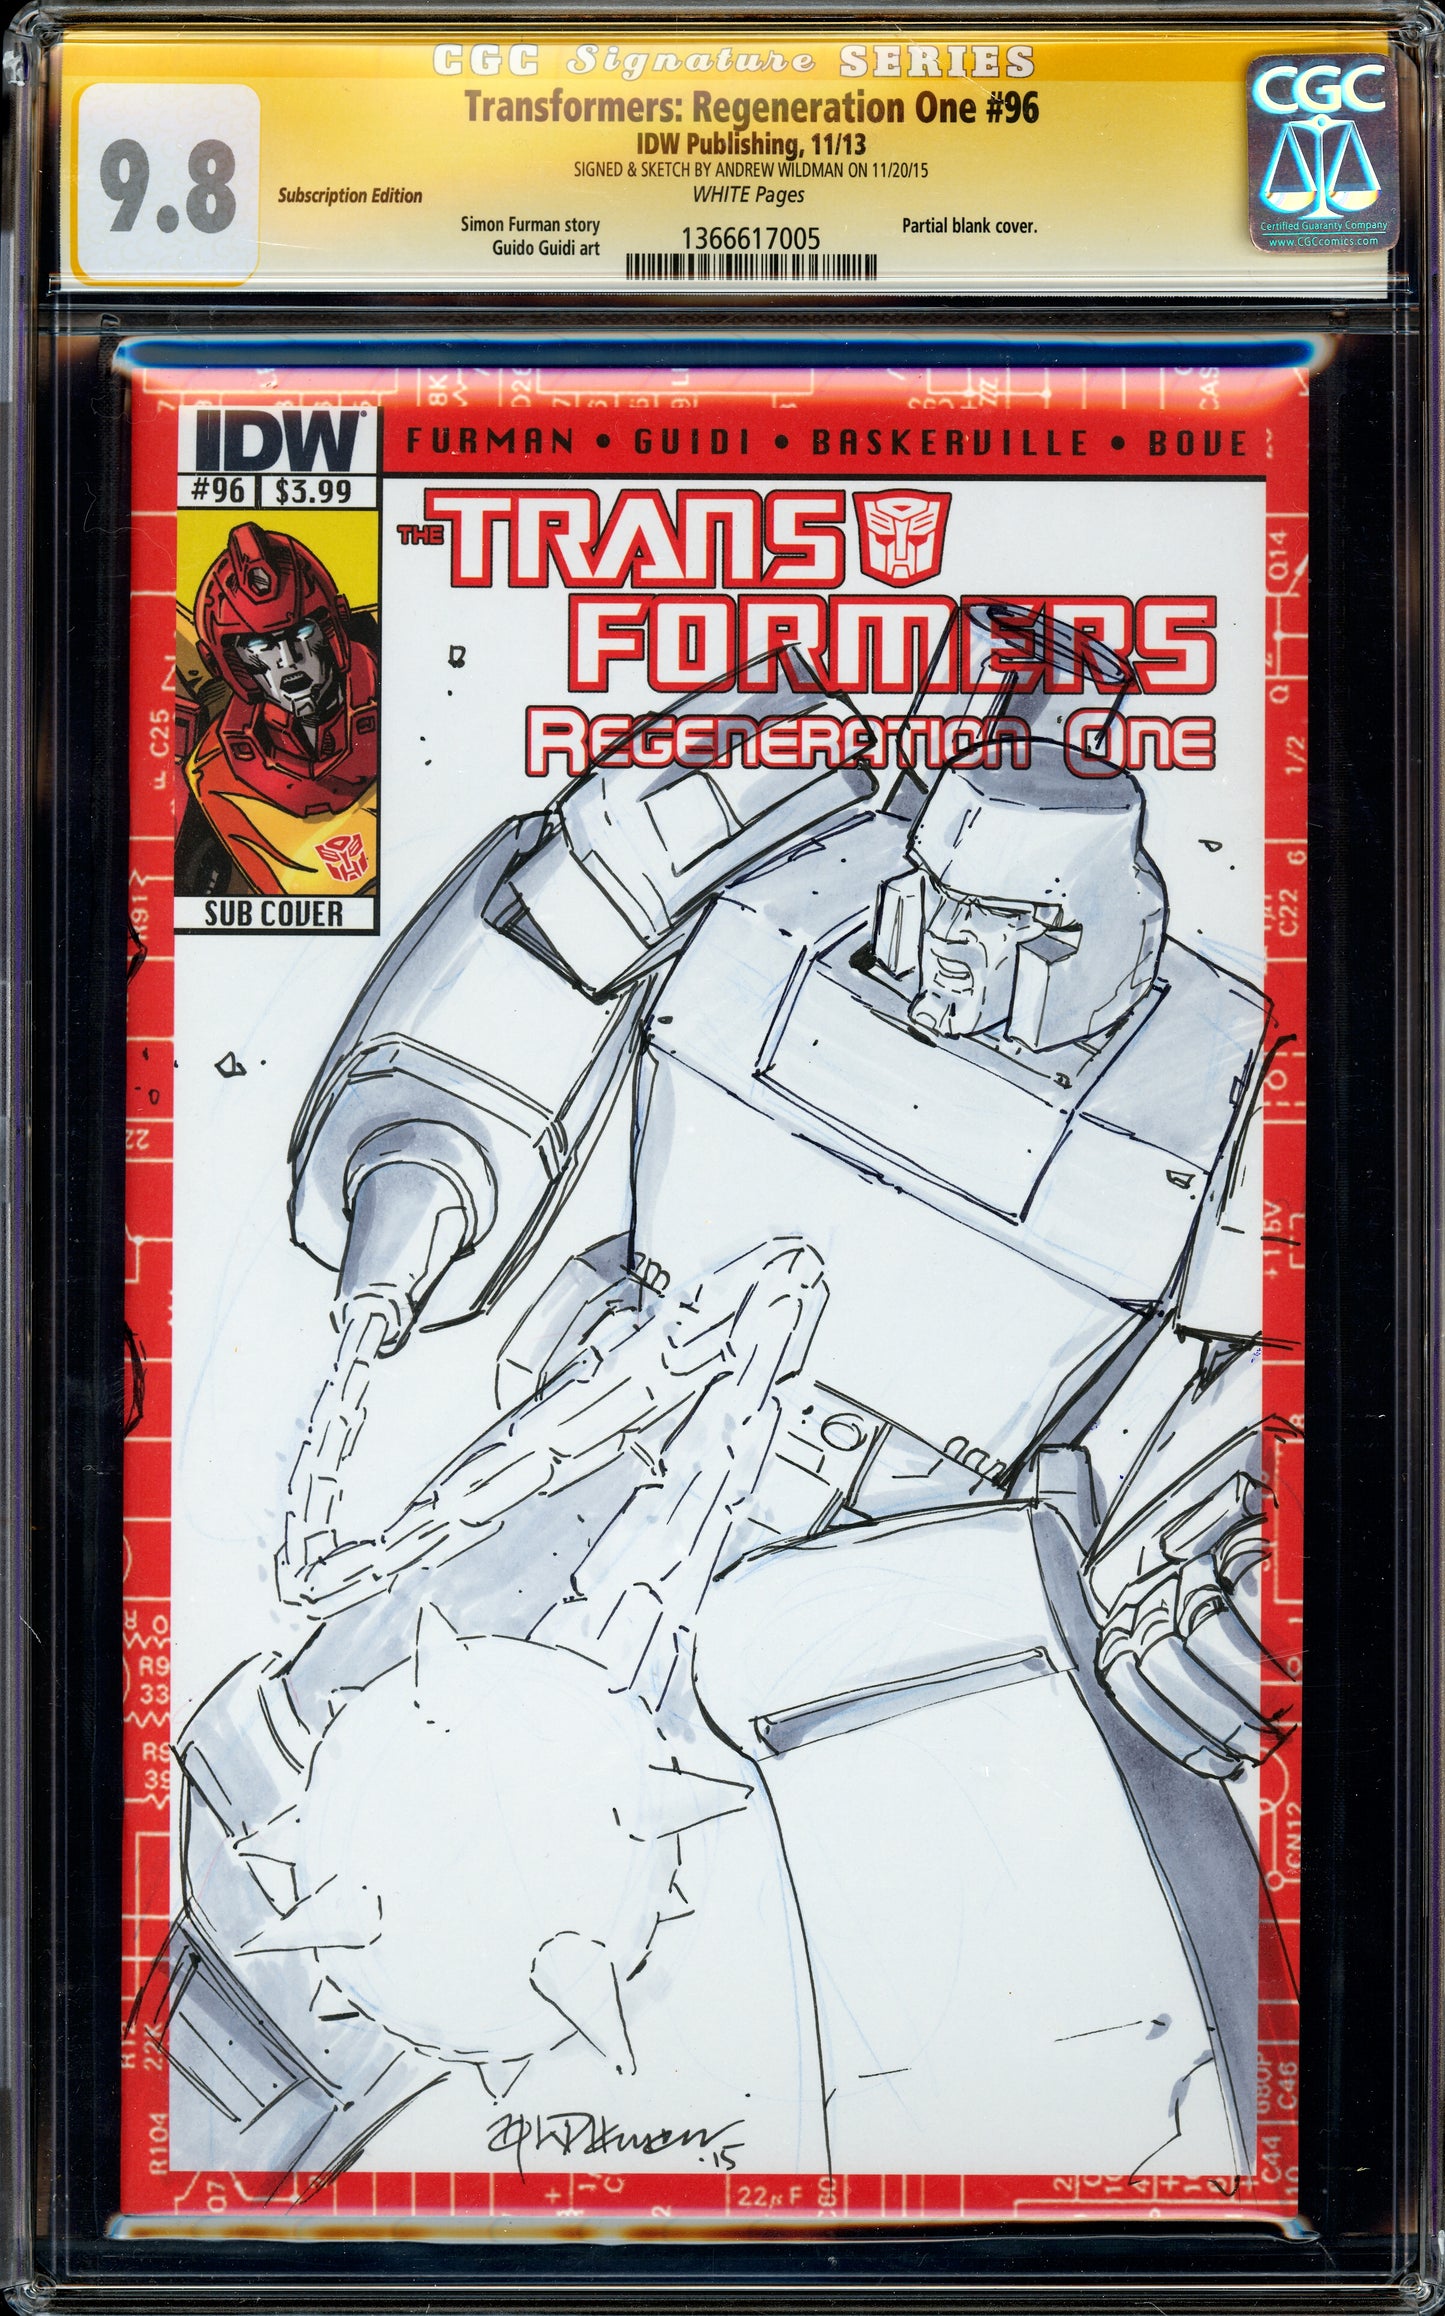 Set of CGC 9.8 Sketch Covers Optimus and Megatron by Legendary Artist Andrew Wildman